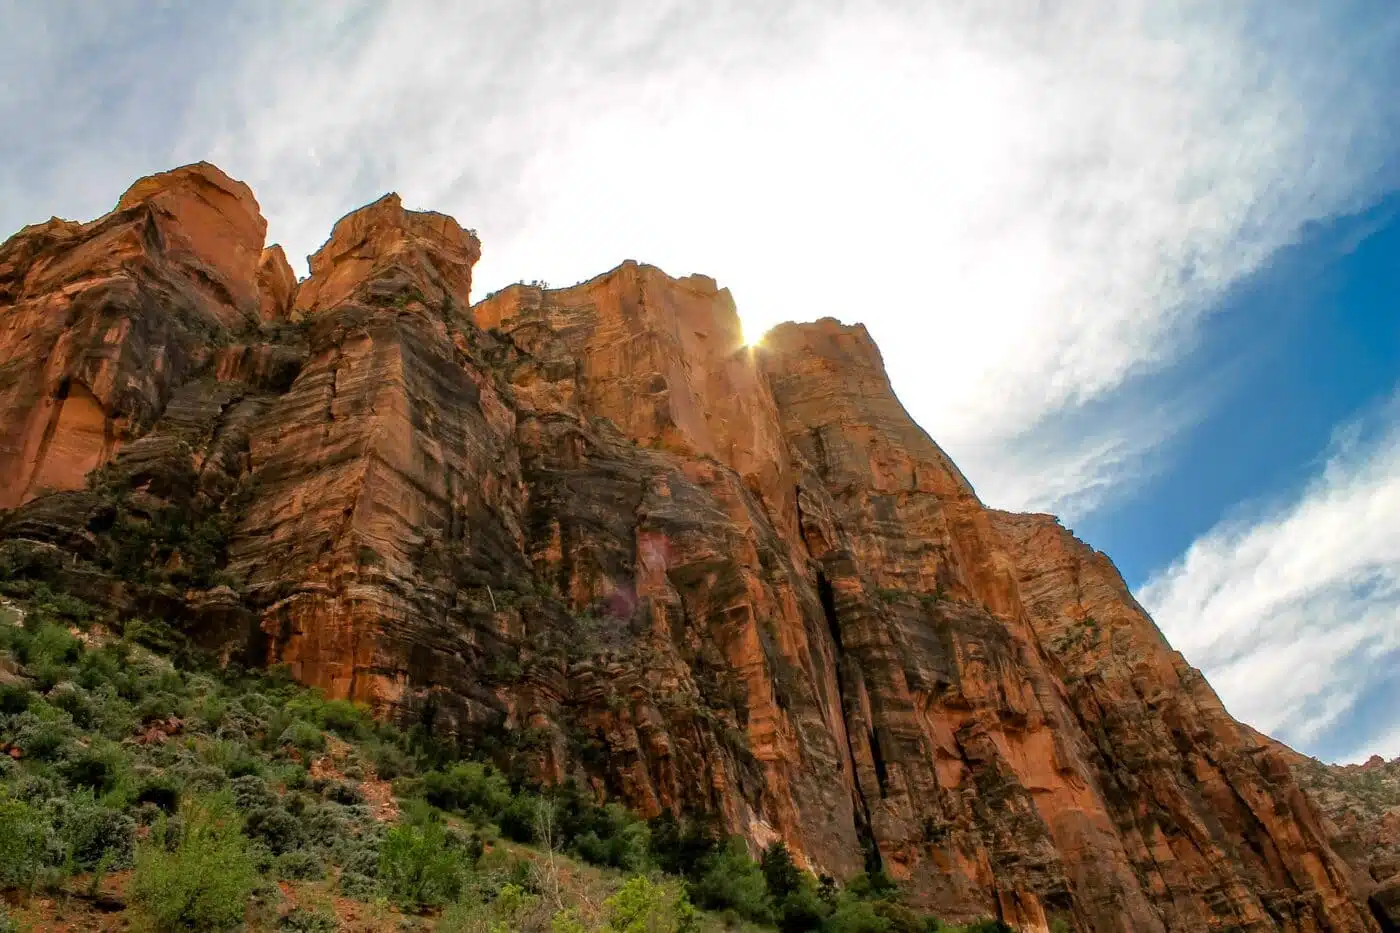 Camping in Zion National Park - View of the Zion Canyon Walls